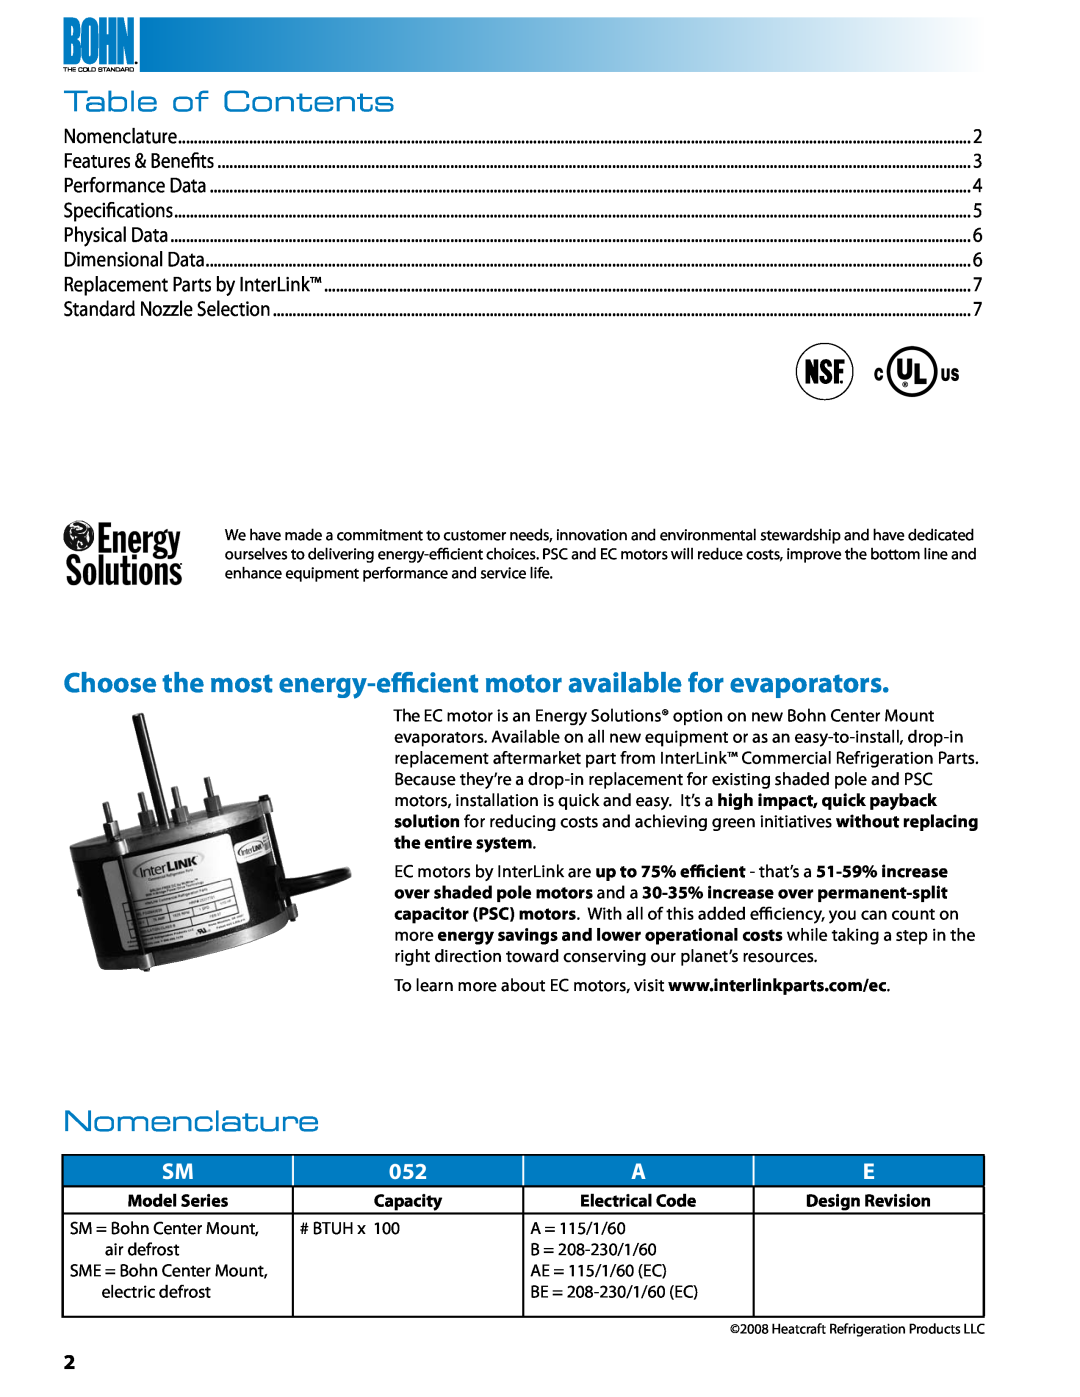 Heatcraft Refrigeration Products SME, BN-CMTB manual Table of Contents, Nomenclature 